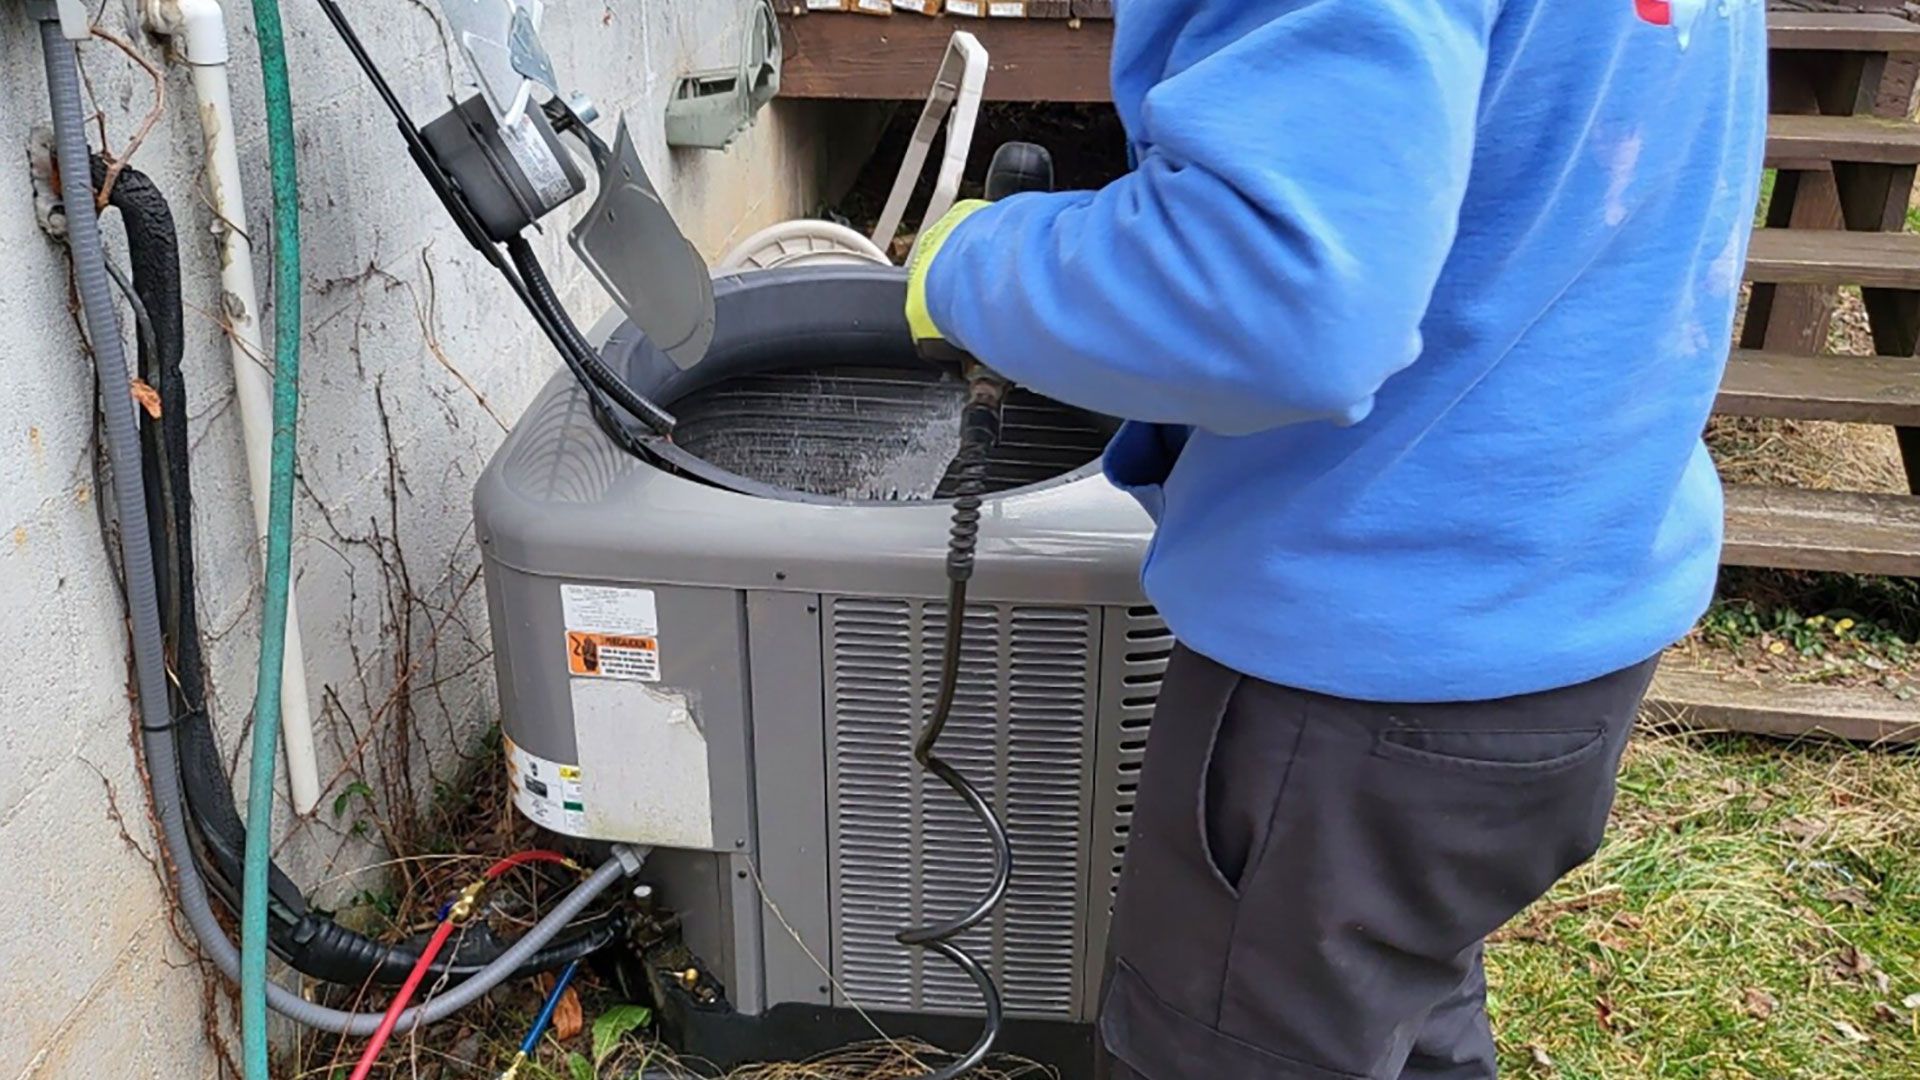 BMS Heating, Cooling, & Refrigeration - Air Conditioning Repair